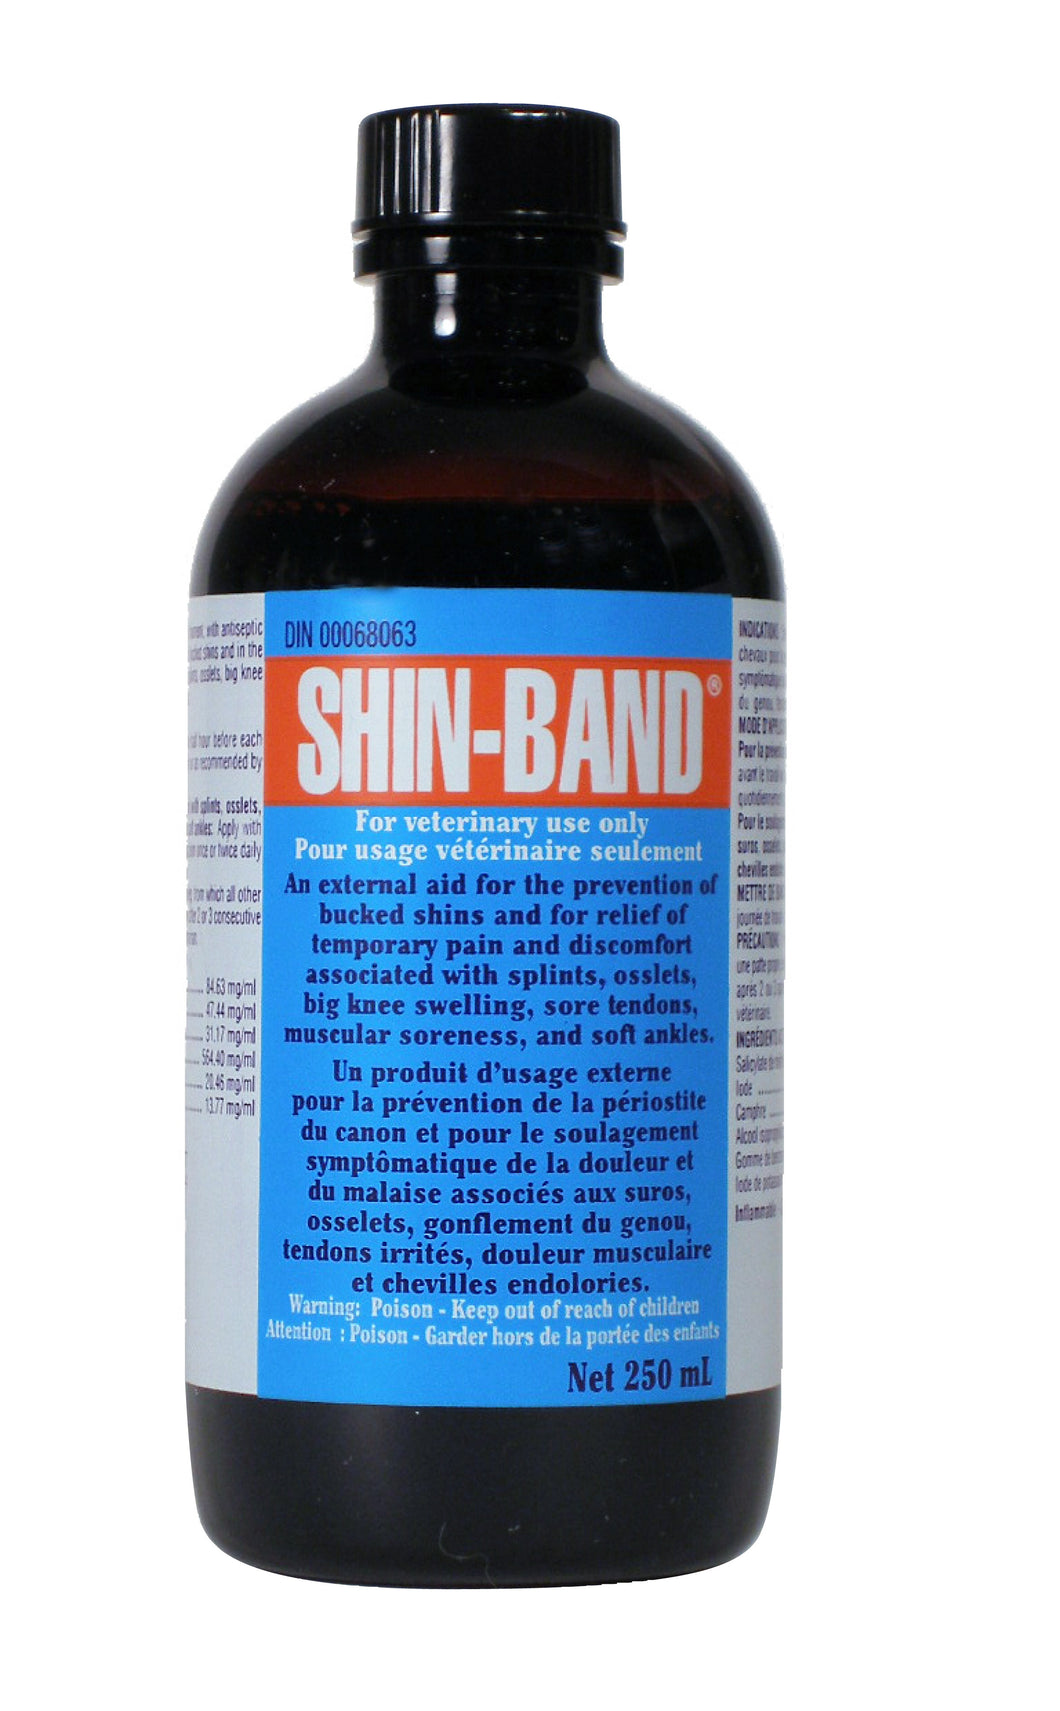 SHIN-BAND 250 ML/ S-B LINIMENT 8 OZ. Horse supply treatment of bucked shins and other leg ailments.